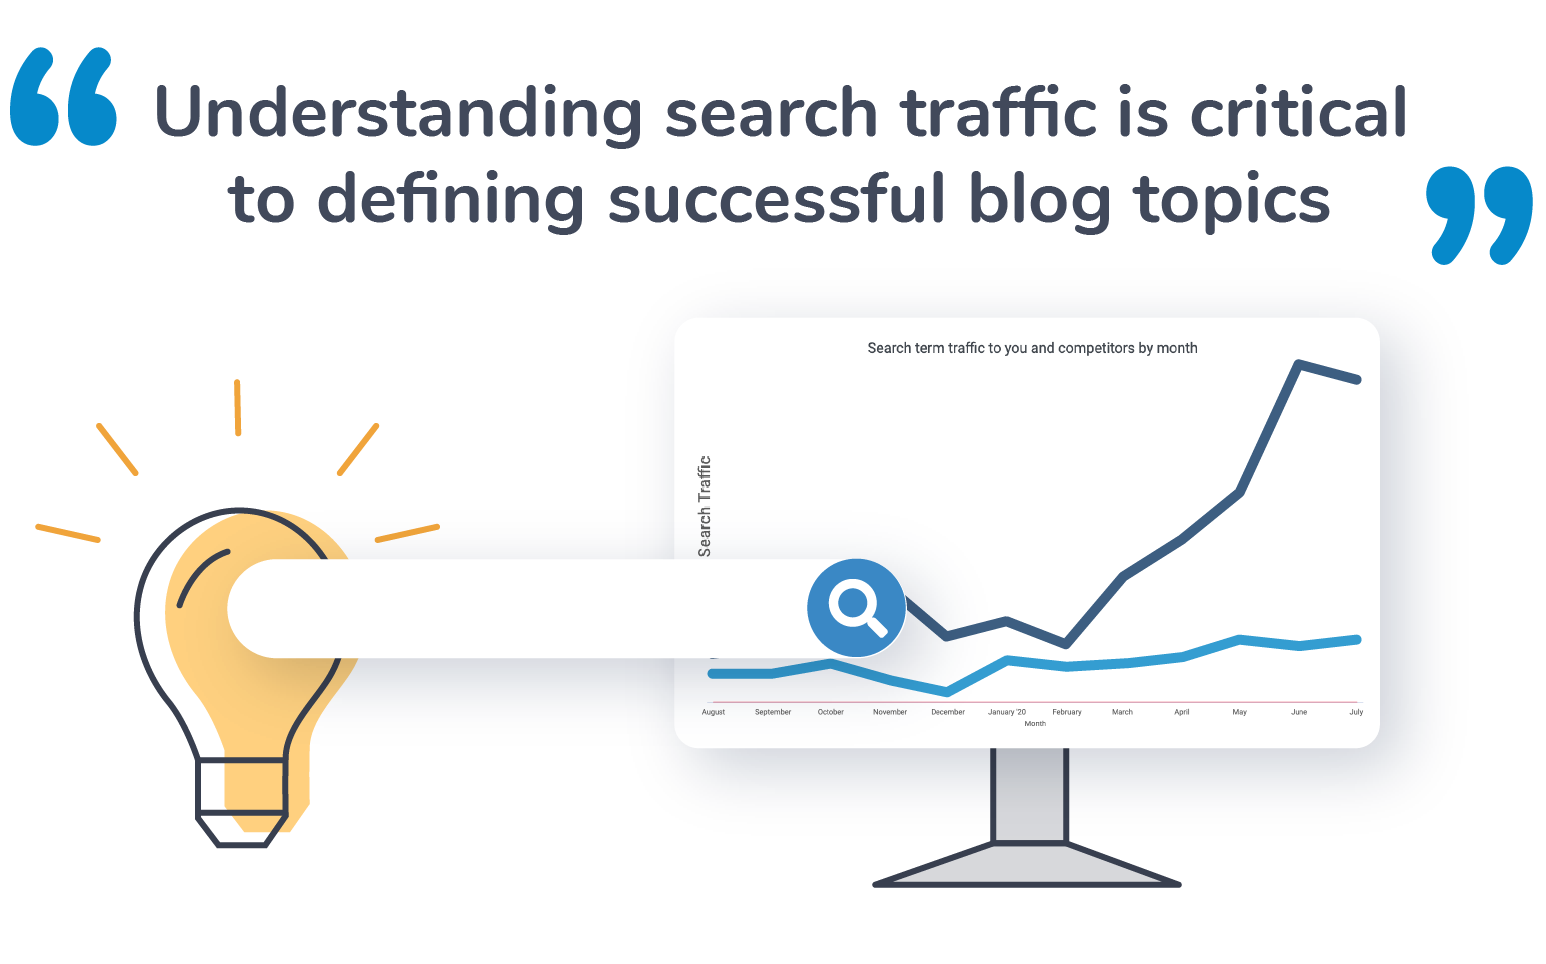 Understanding Search Traffic for blog topics